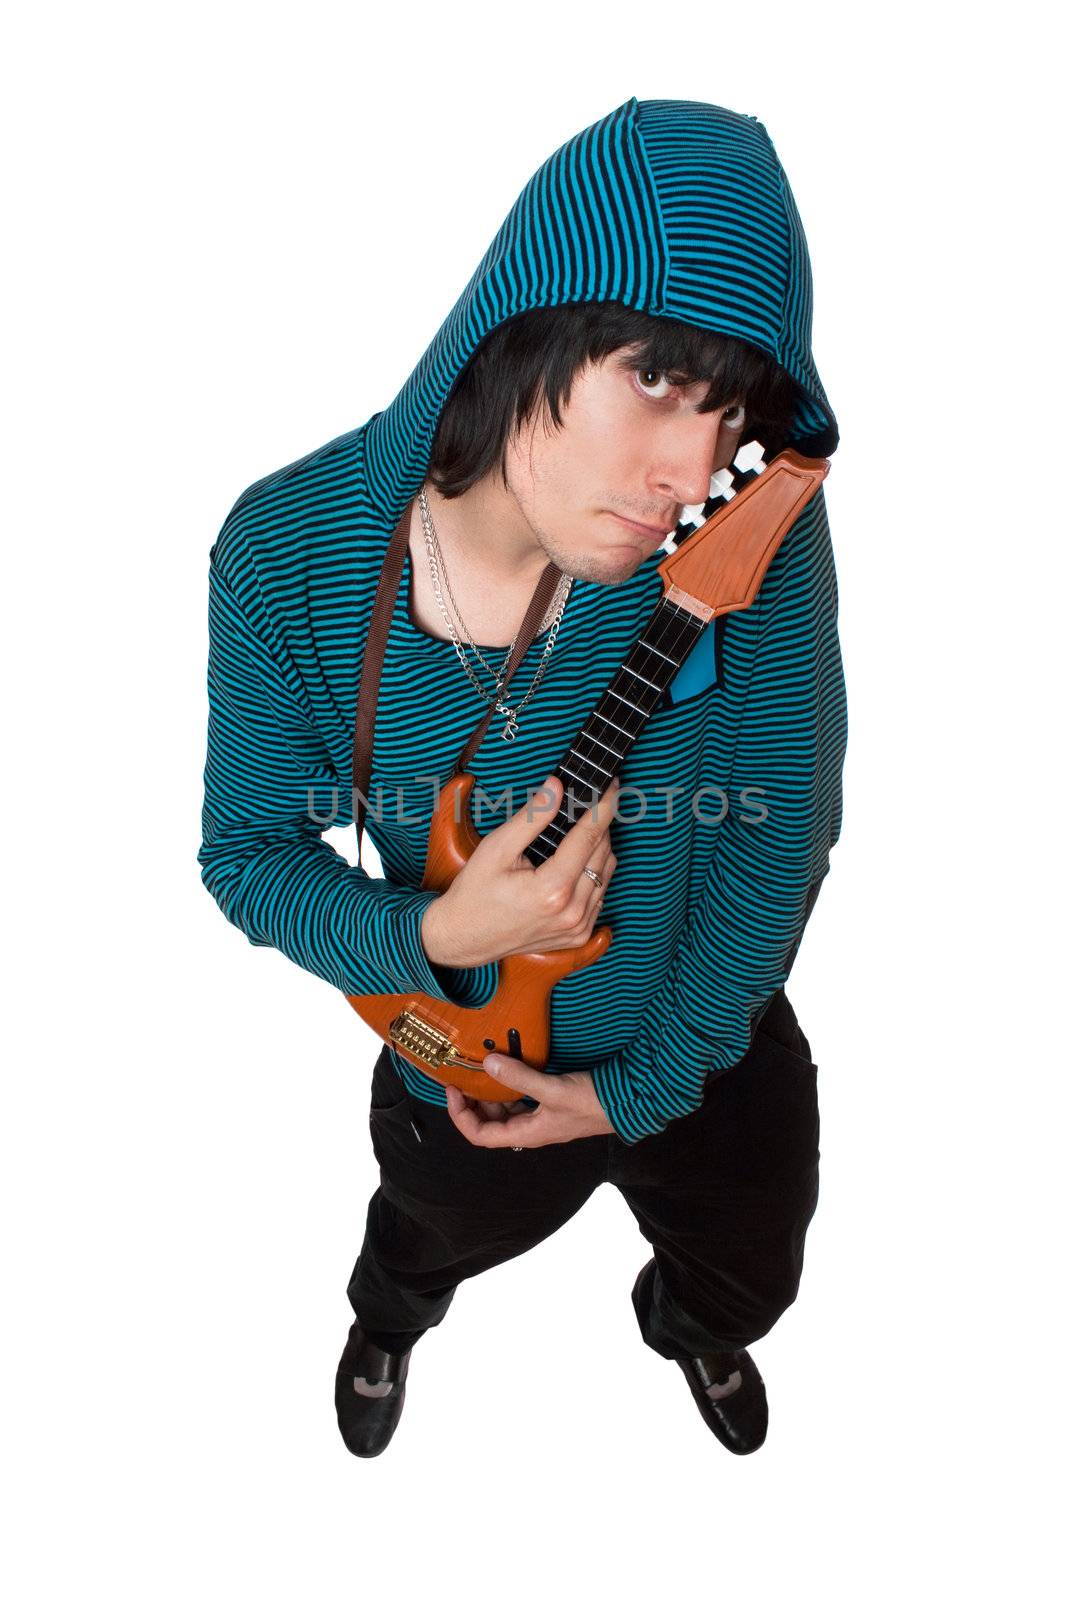 Bizarre young man with a little guitar by acidgrey